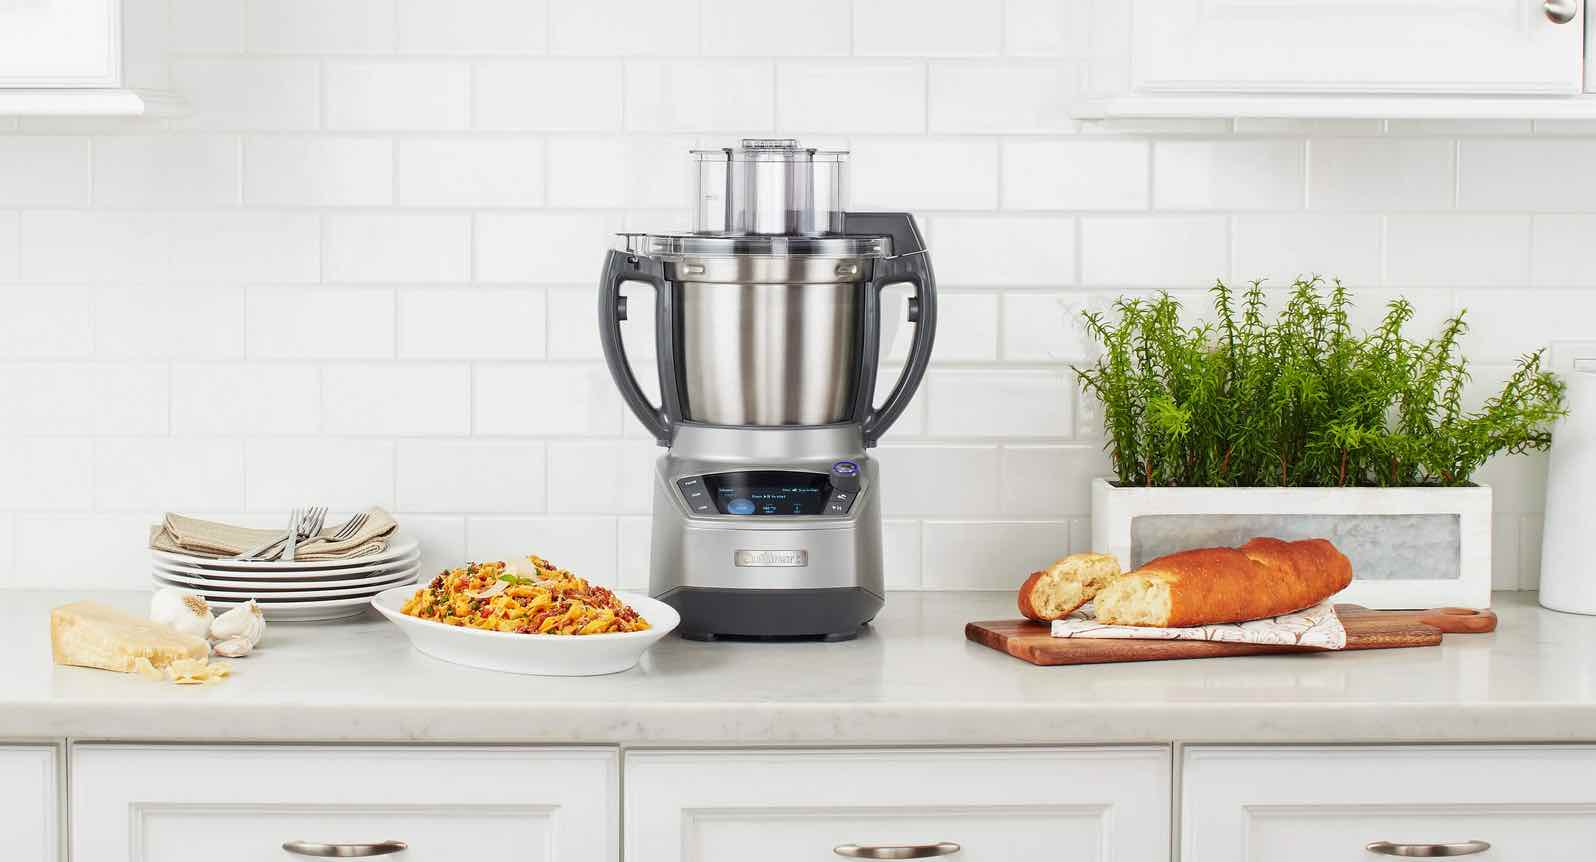 Cuisinart Complete Chef appliance